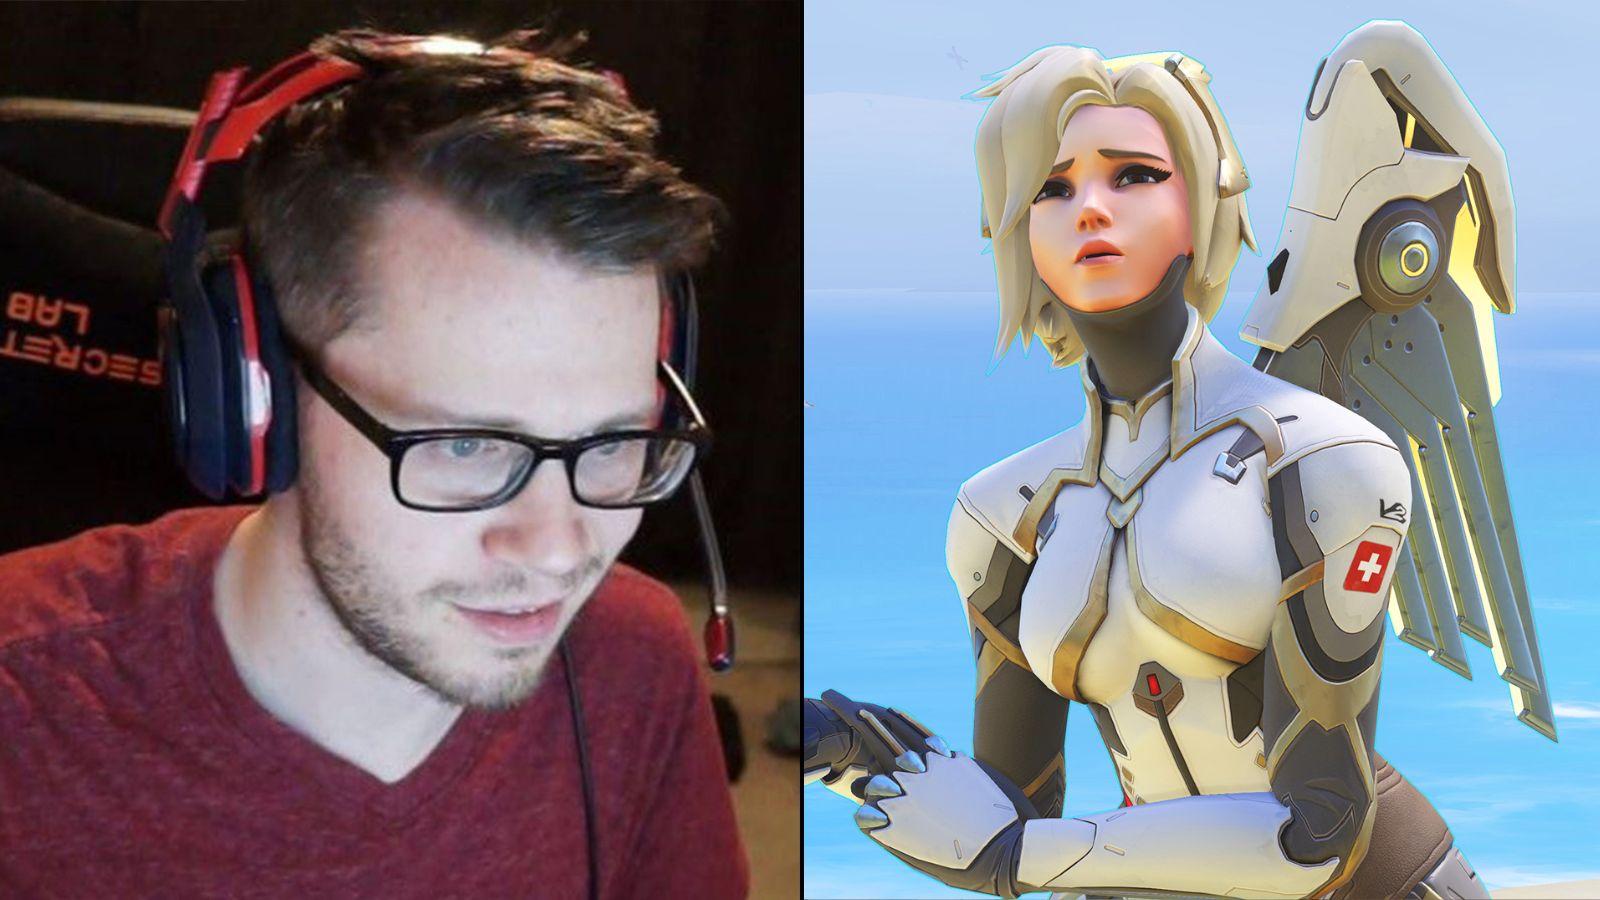 Emongg comments on hardstuck silver mercy player